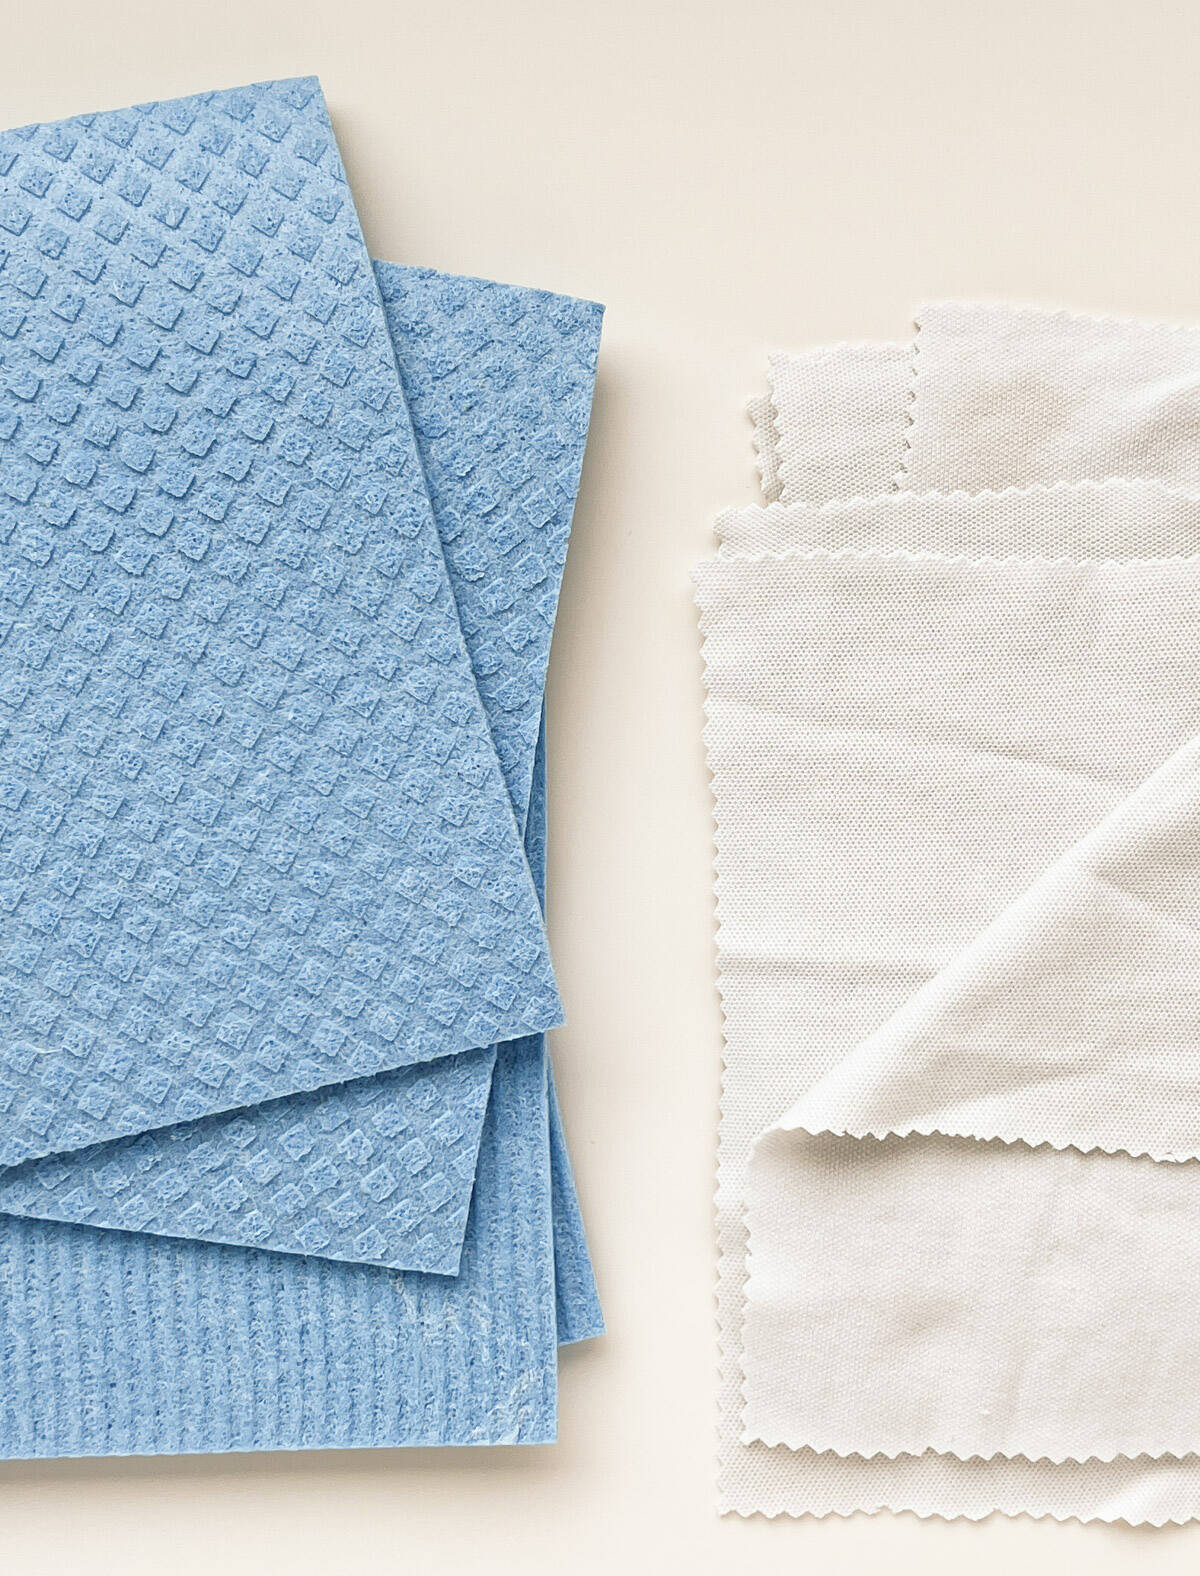 An image to two stacks of paper towel replacements, including cellulose towels and homemade fabric towels.